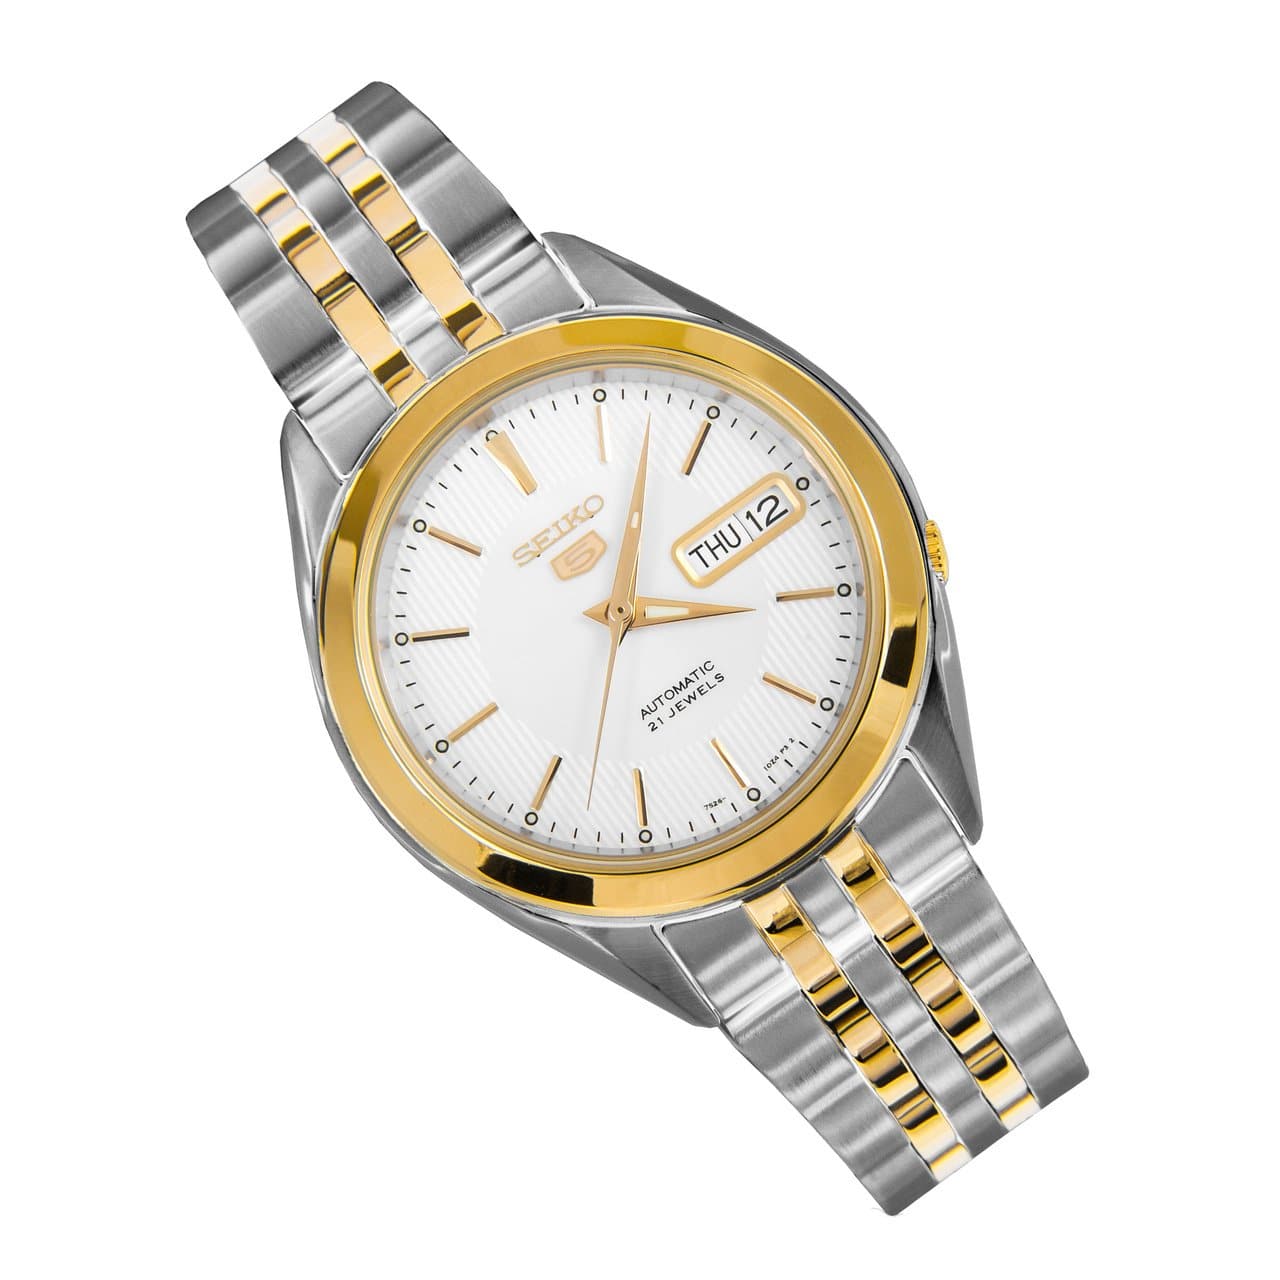 Seiko 5 Classic White Dial Couple's 2 tone Gold Plated Stainless Steel Watch Set SNKL24K1+SYMK44K1 - Diligence1International